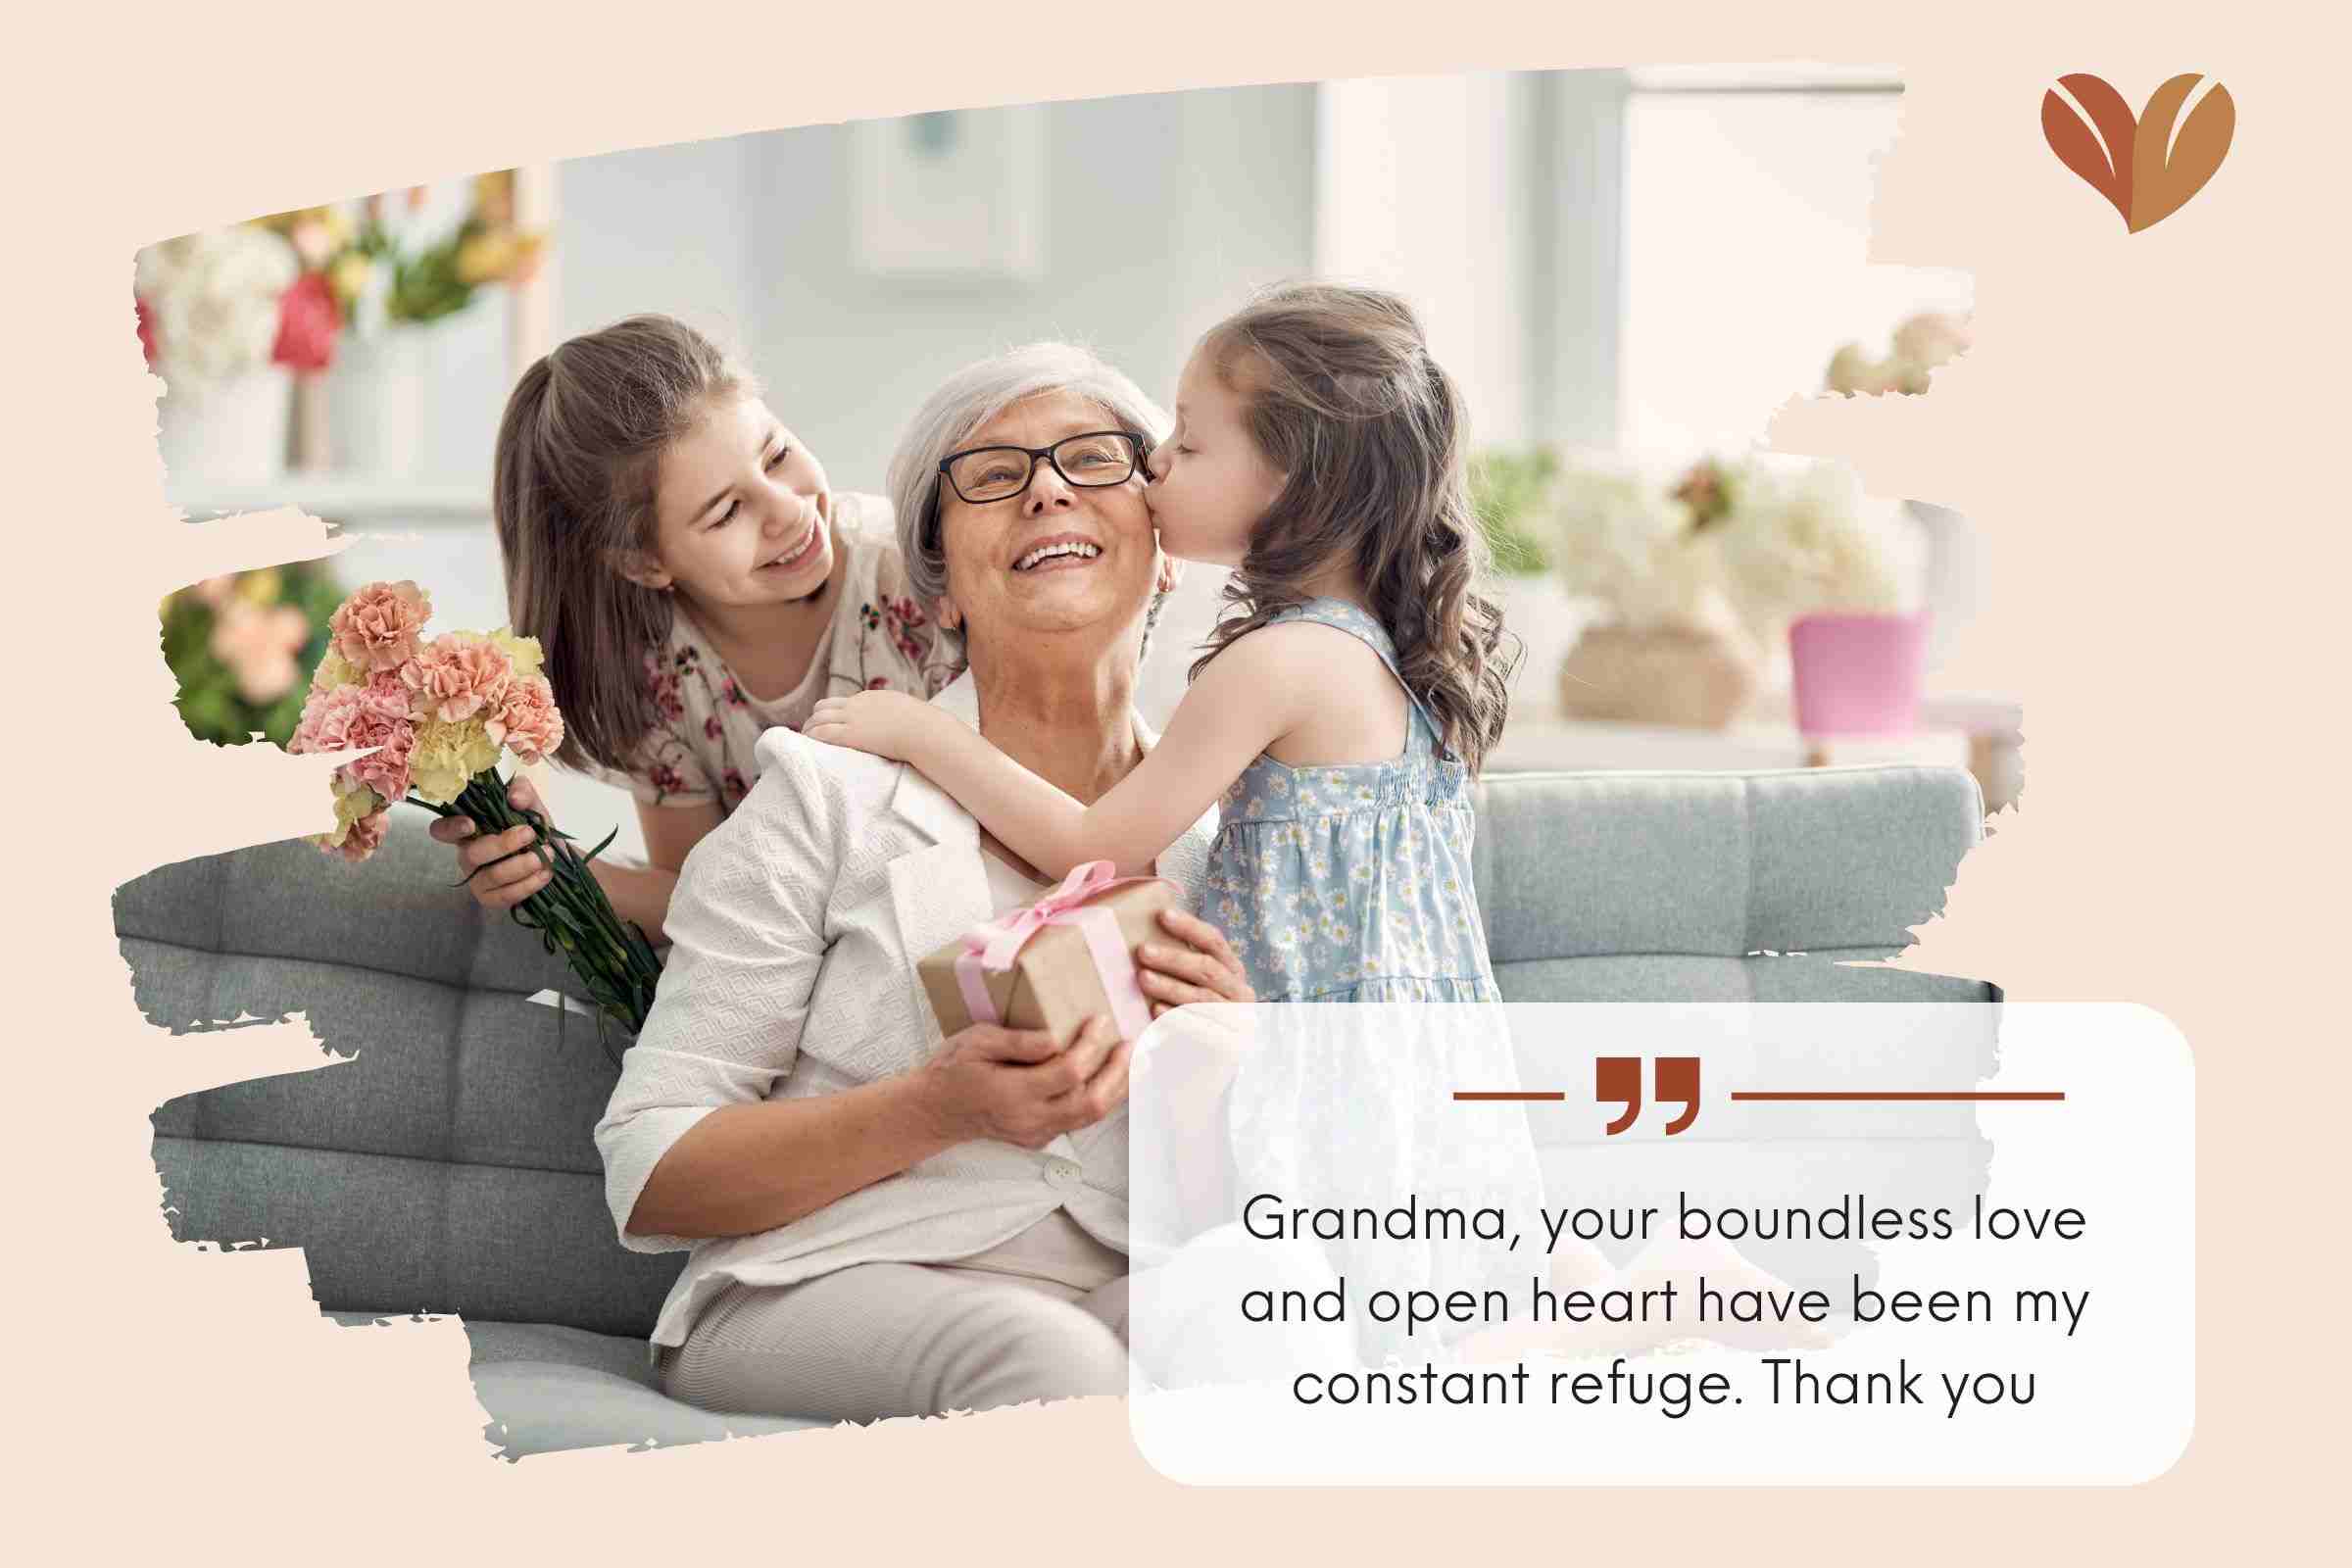 Grandmother Mothers Day Quotes: Grandma's embrace wraps us in love, a comforting blanket on cold days.